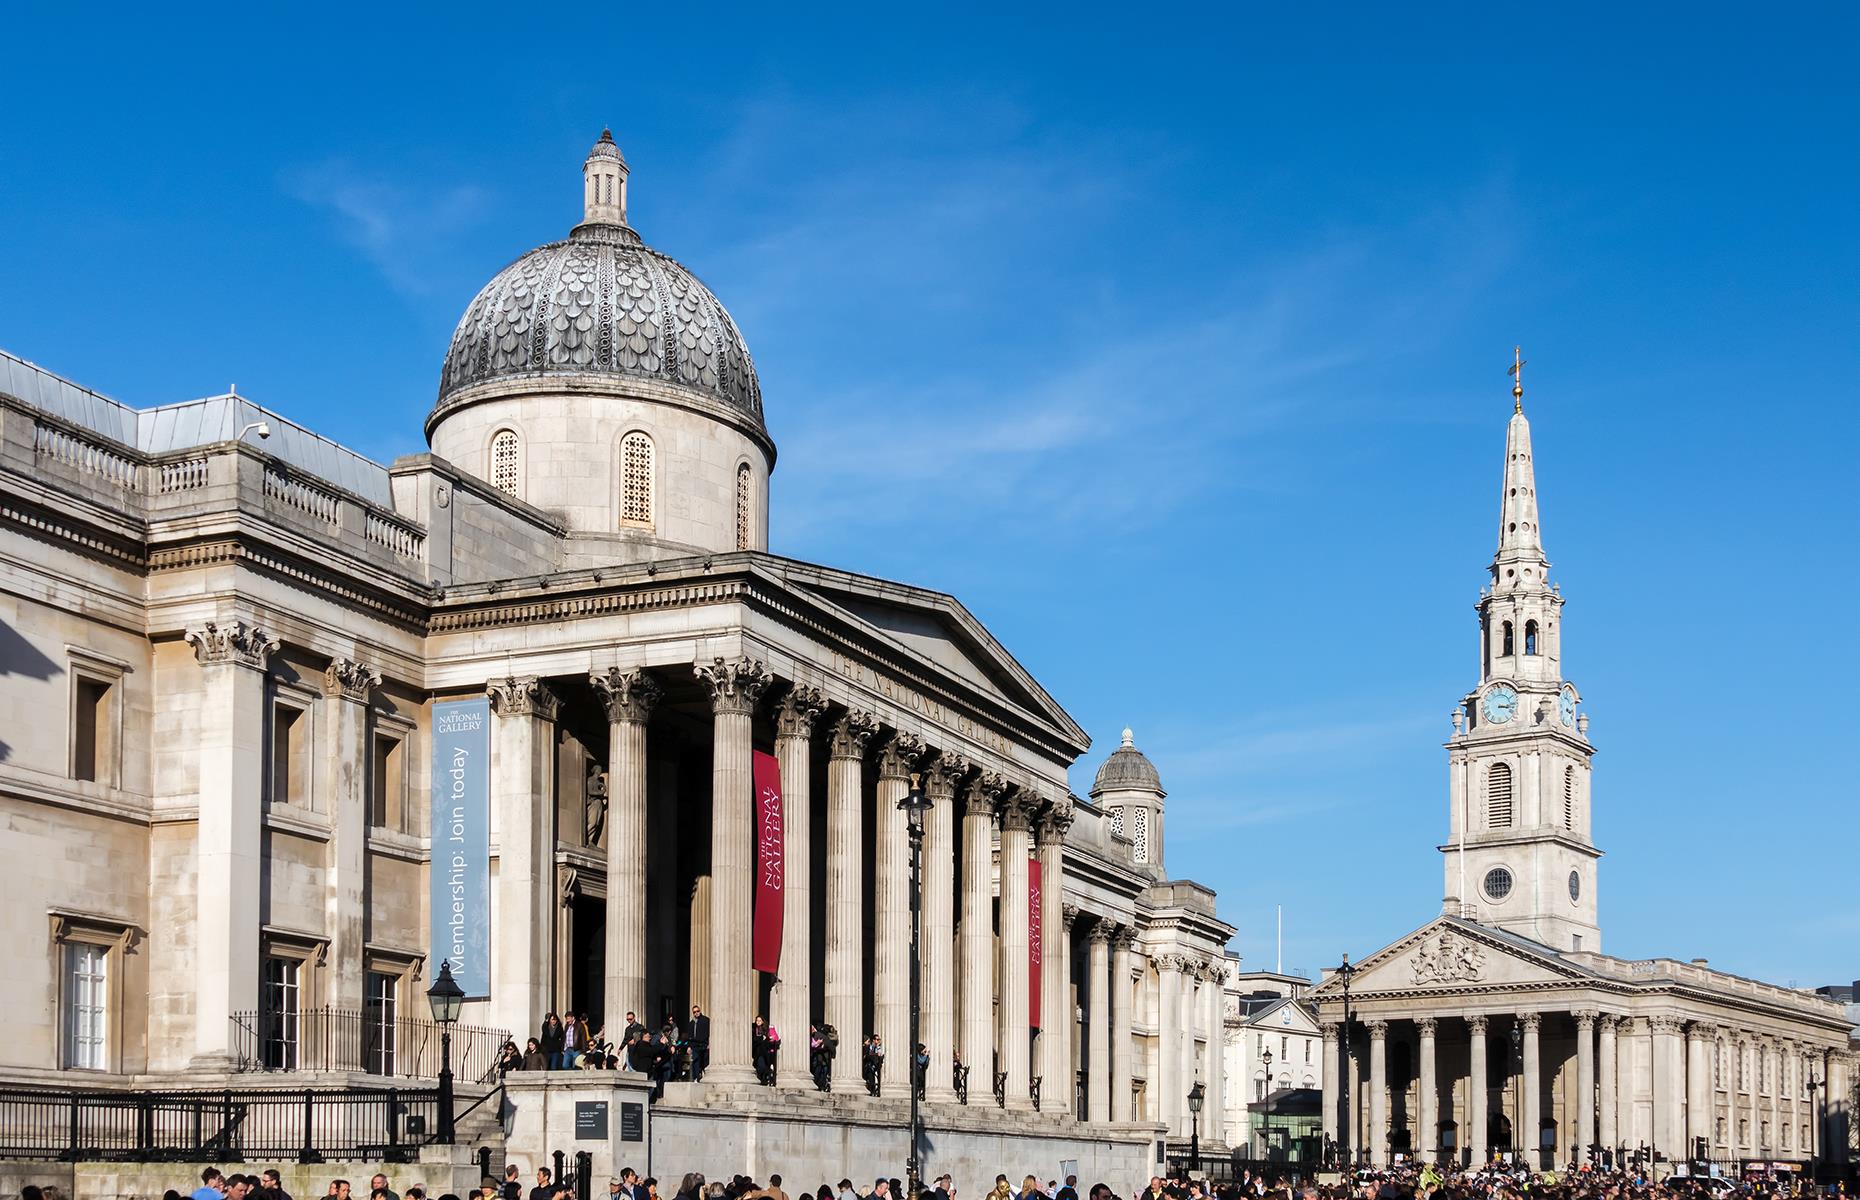 <p>It’s one of the world’s finest art galleries – and as it’s free, it’s one of <a href="https://www.loveexploring.com/guides/64317/what-to-do-in-london-guide">London</a>’s best bargains. The National Gallery’s huge collection covers everything from 13th-century paintings to works from the early 20th century. Among the 2,300-odd artworks are some of the world's best-known paintings, including Van Gogh's Sunflowers and Van Eyck's Arnolfini Portrait.</p>